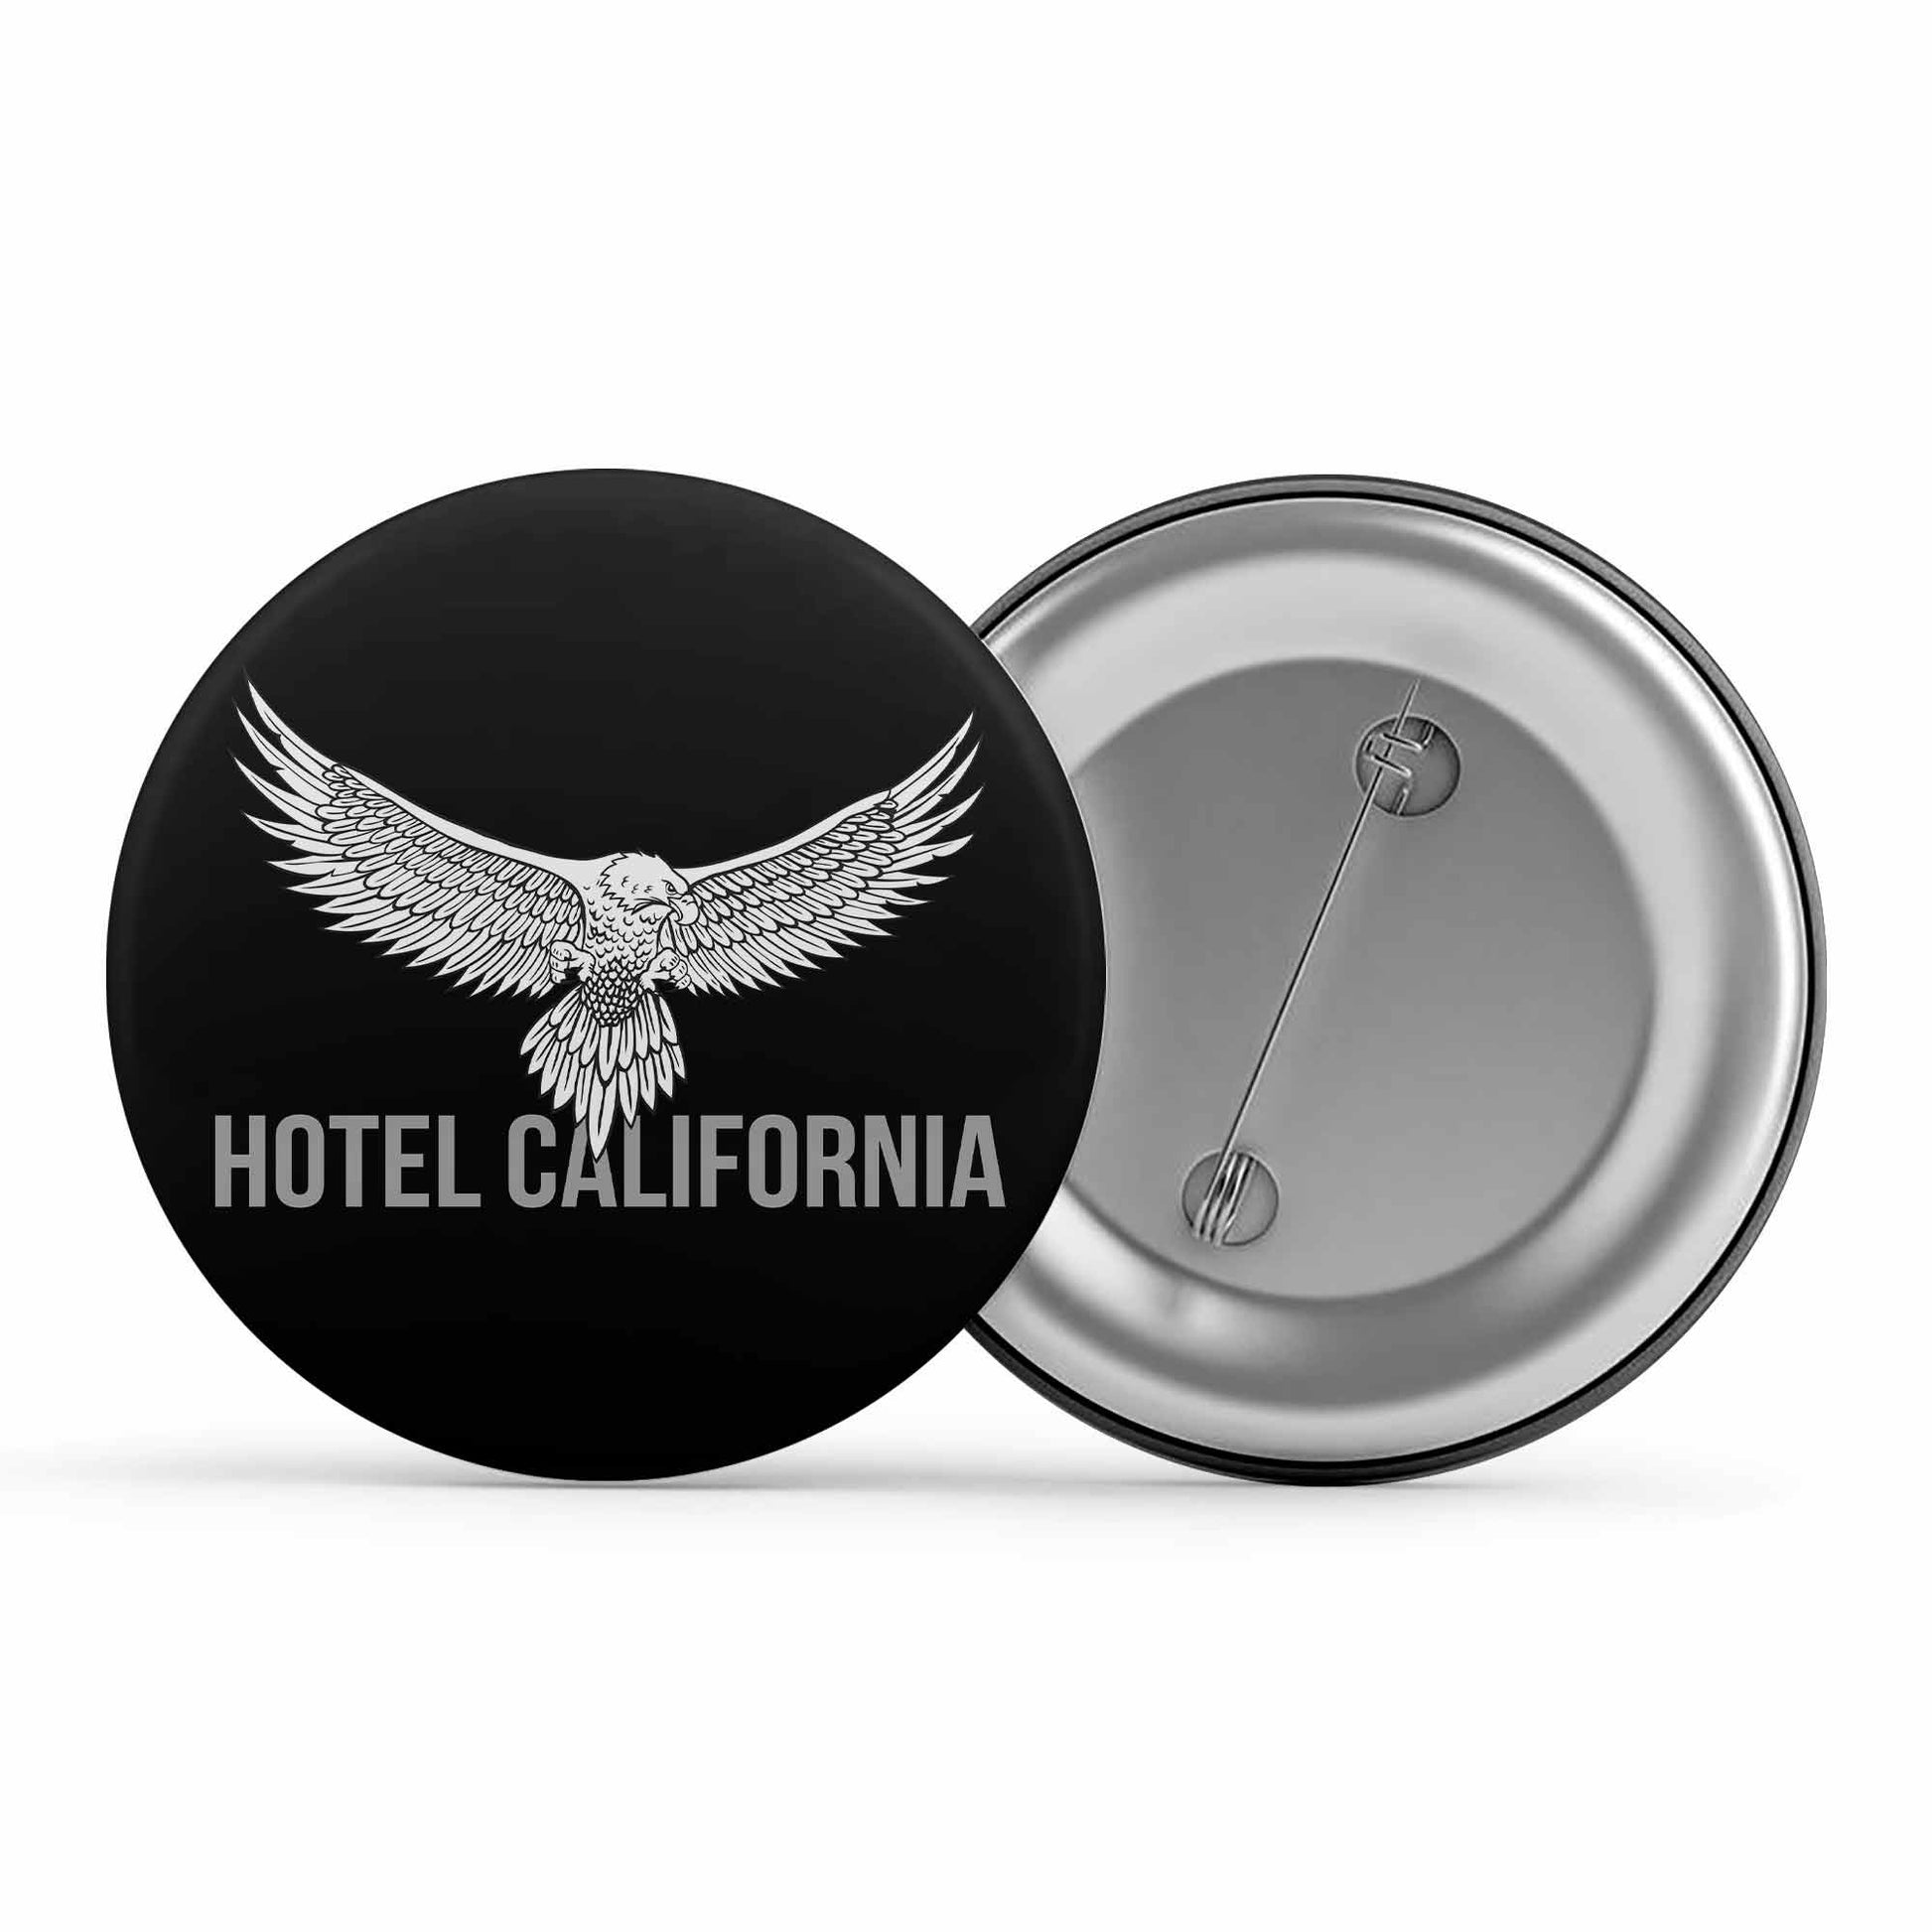 eagles hotel california badge pin button music band buy online united states of america usa the banyan tee tbt men women girls boys unisex